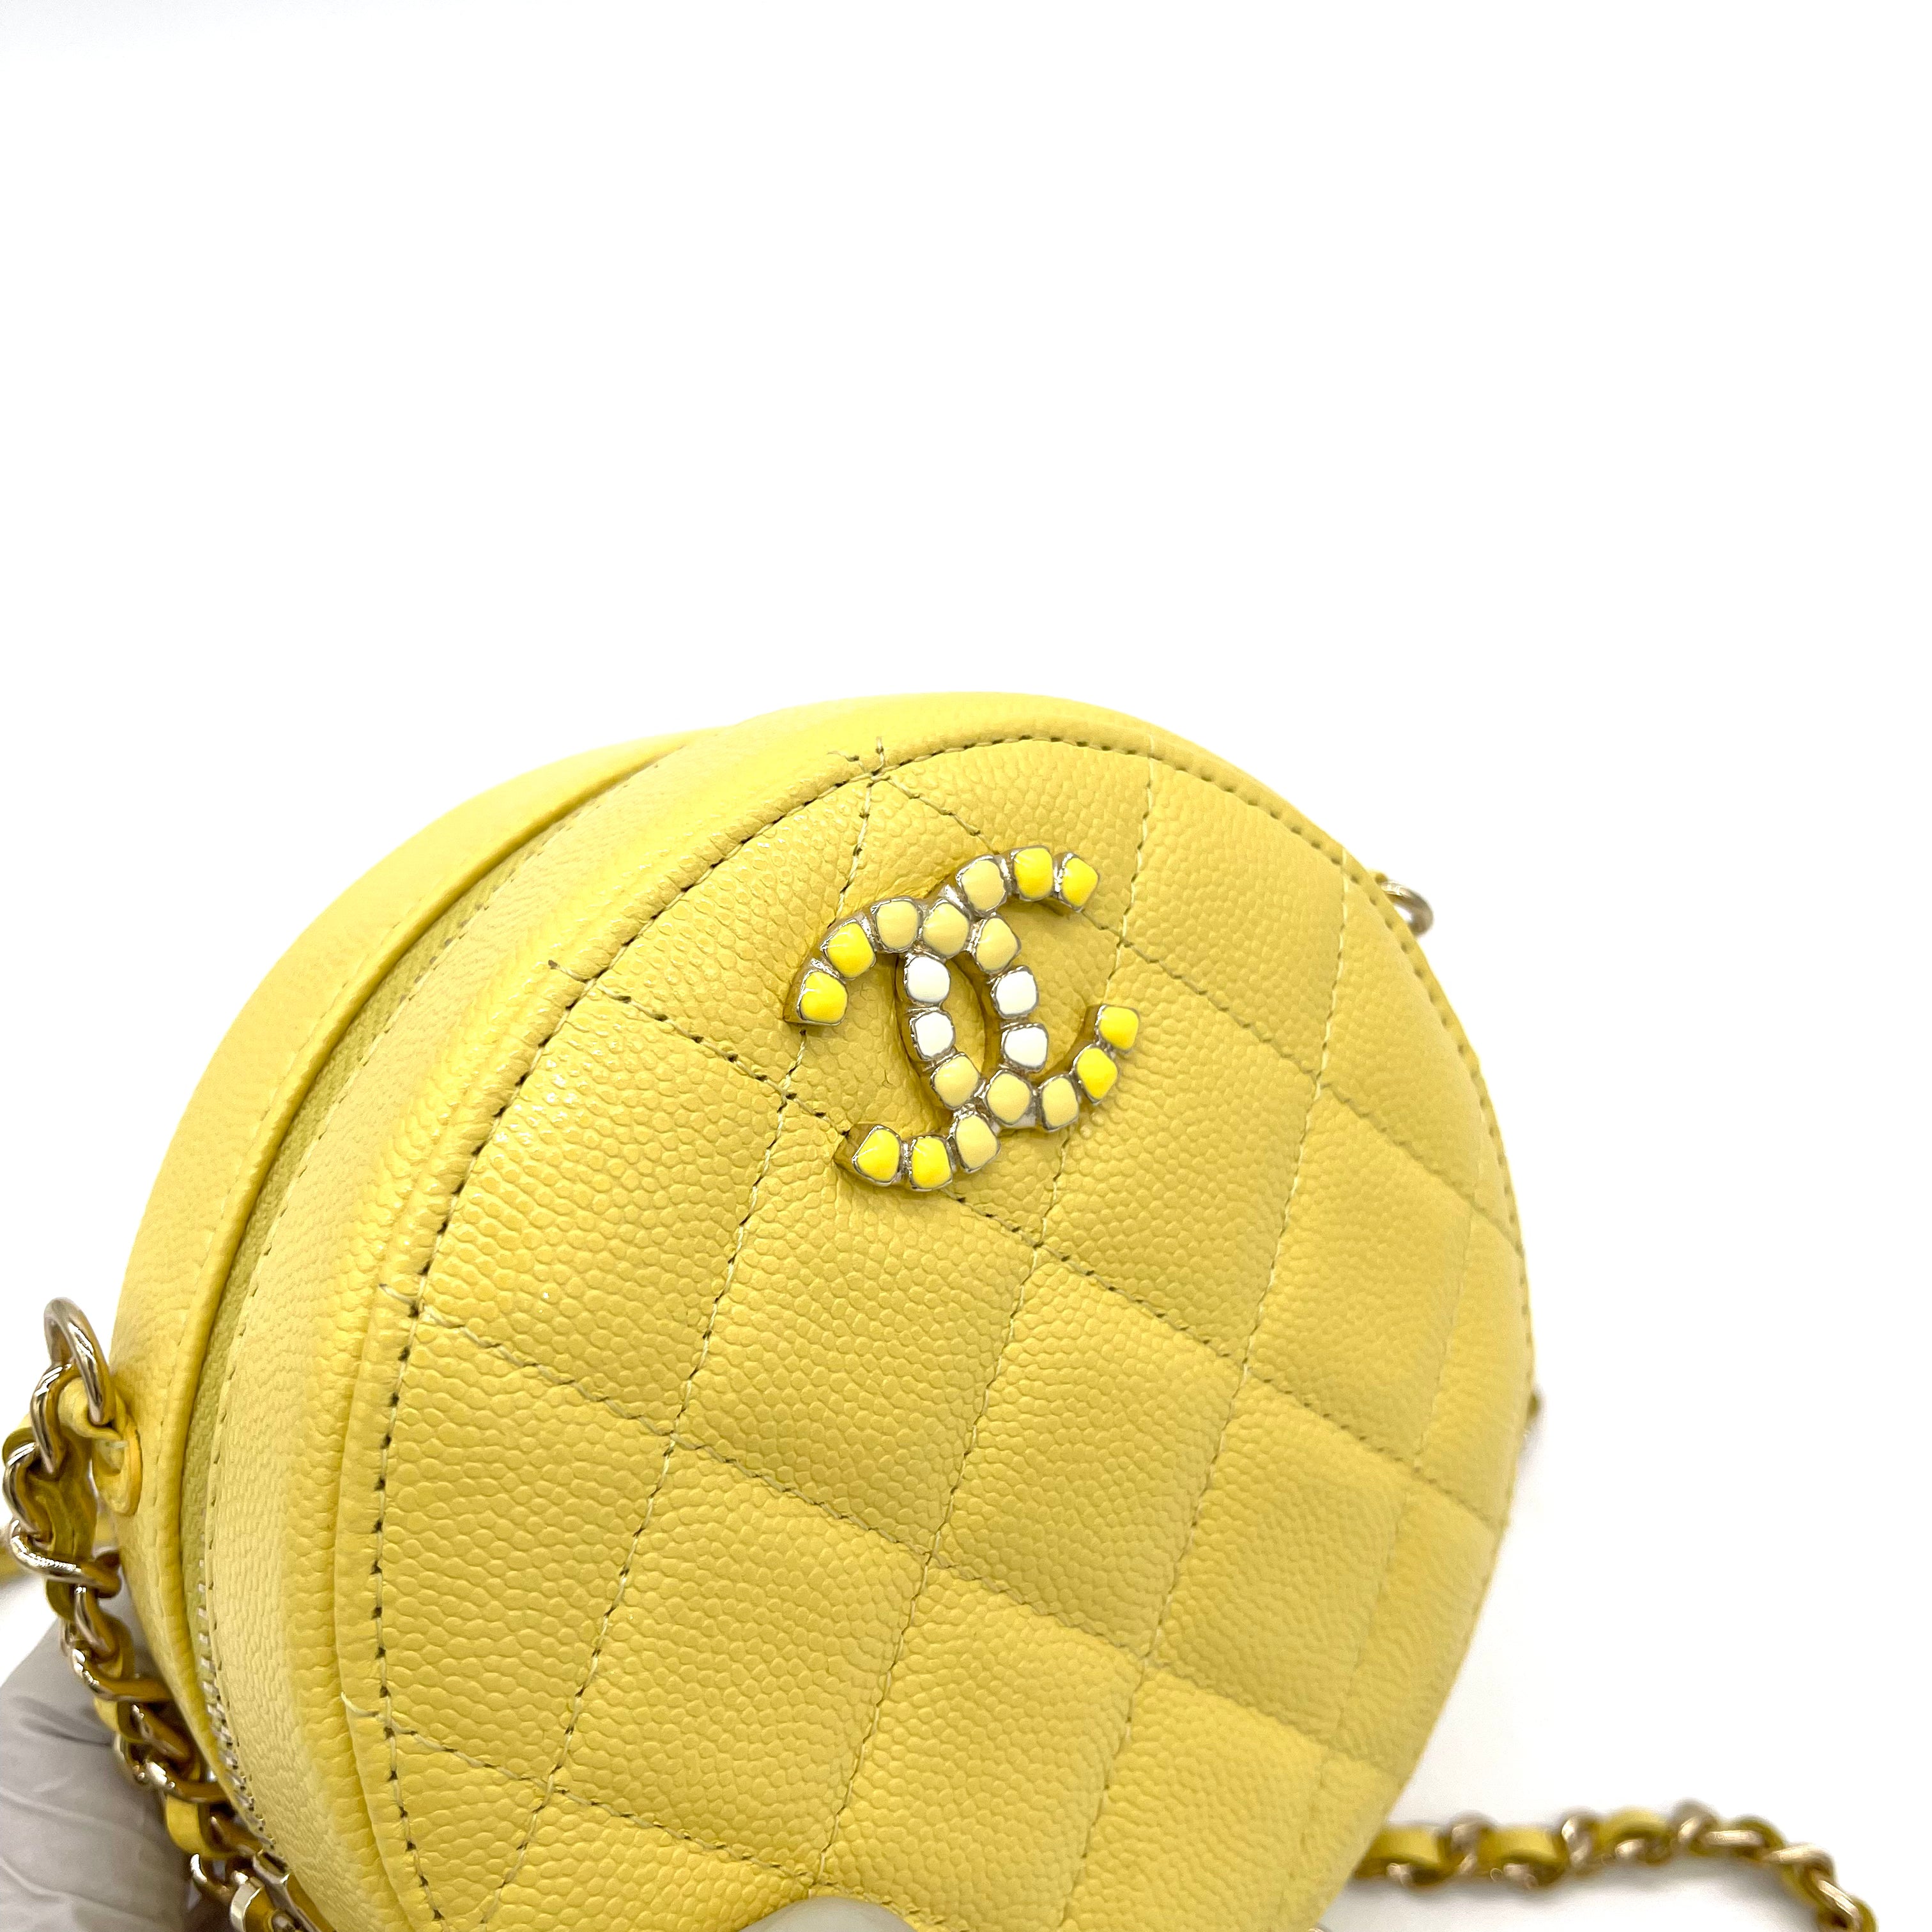 Chanel Round Quilted Caviar Leather Clutch Crossbody Bag